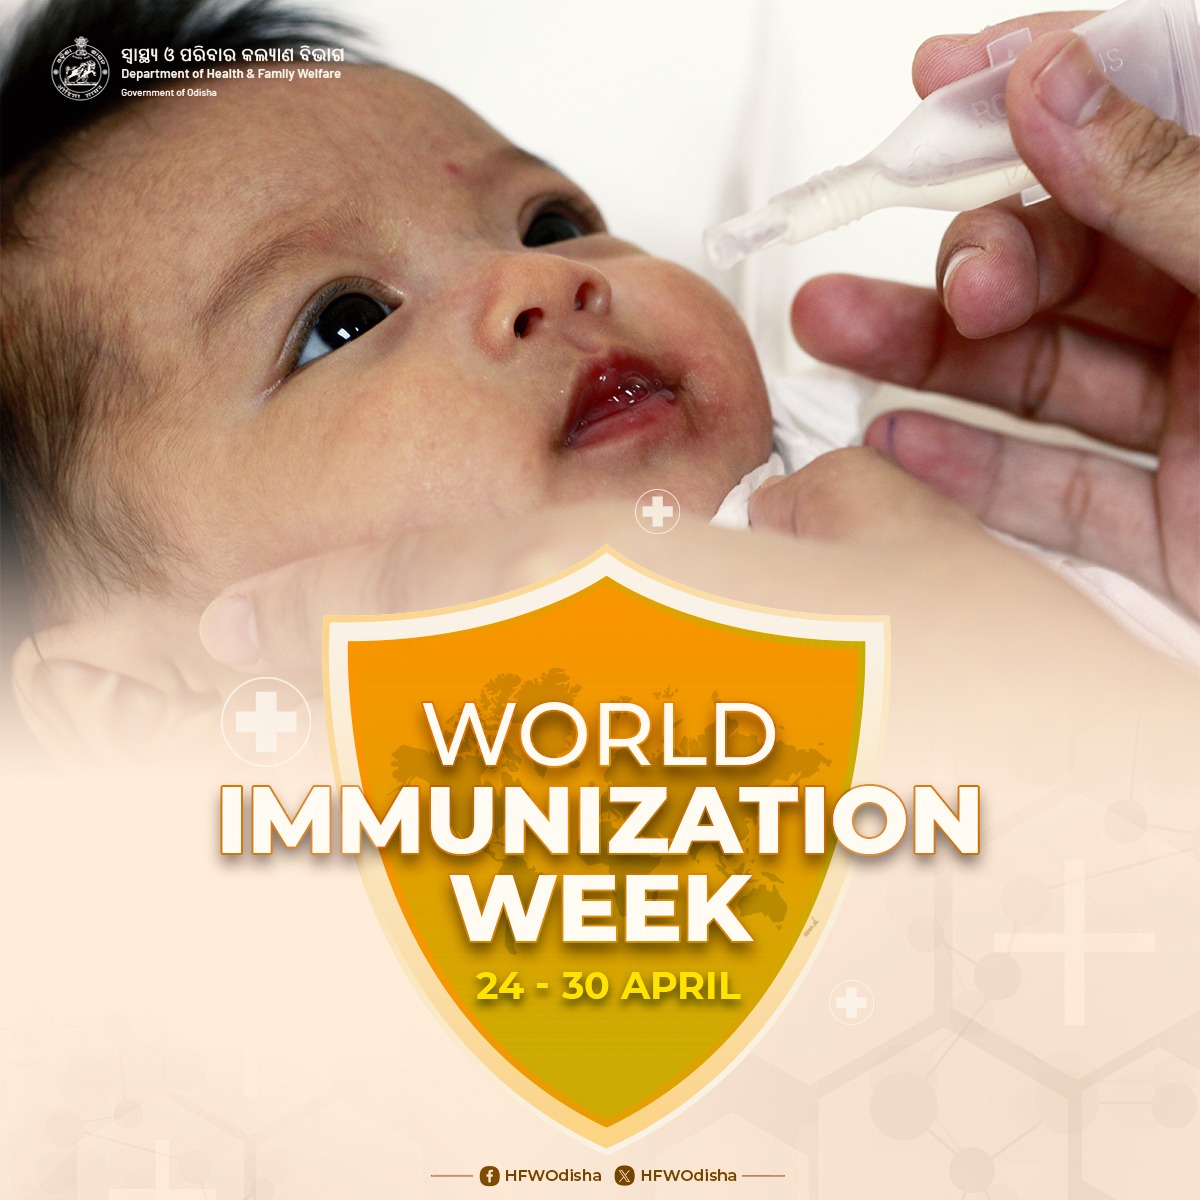 On this #WorldImmunizationWeek, take proactive steps to get your children vaccinated to protect them from several vaccine-preventable diseases like Polio, #COVID19, Typhoid, Hepatitis B etc. #OdishaCares

'Humanly Possible: Immunization for All'